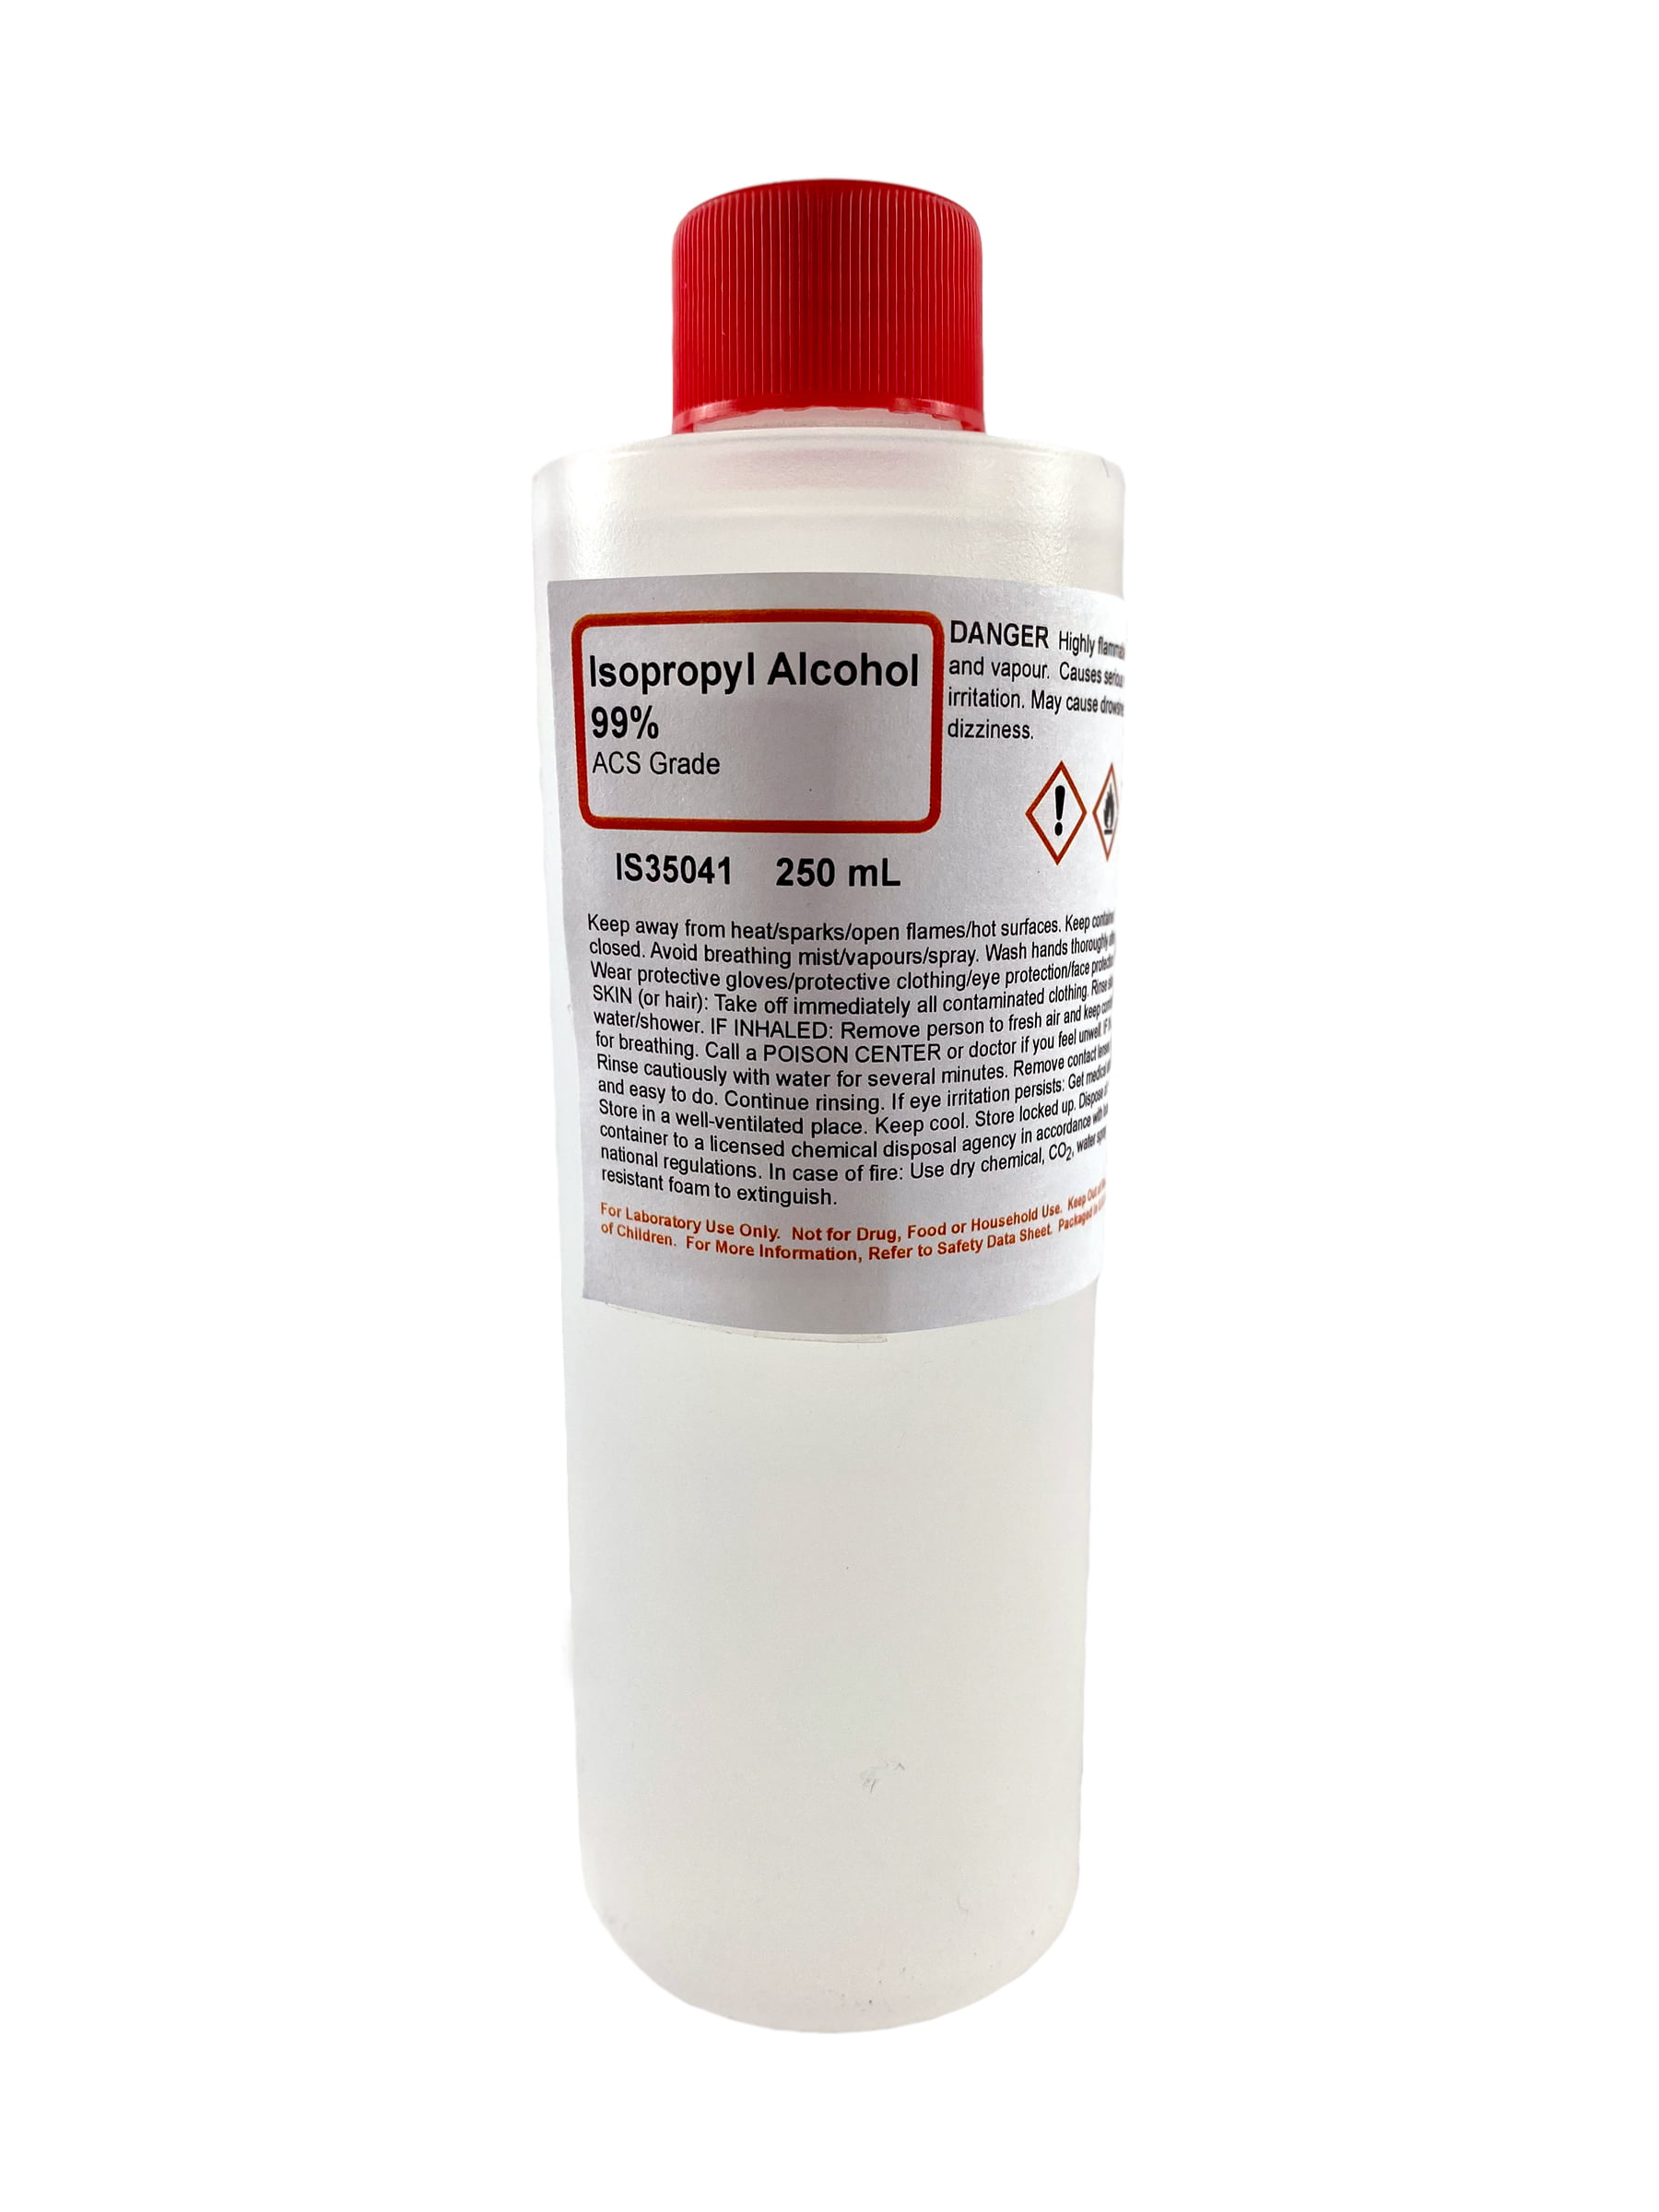 Isopropyl Alcohol (IPA) 99% Solution, 250mL - ACS Grade - Concentrated  Rubbing Alcohol - The Curated Chemical Collection by Innovating Science